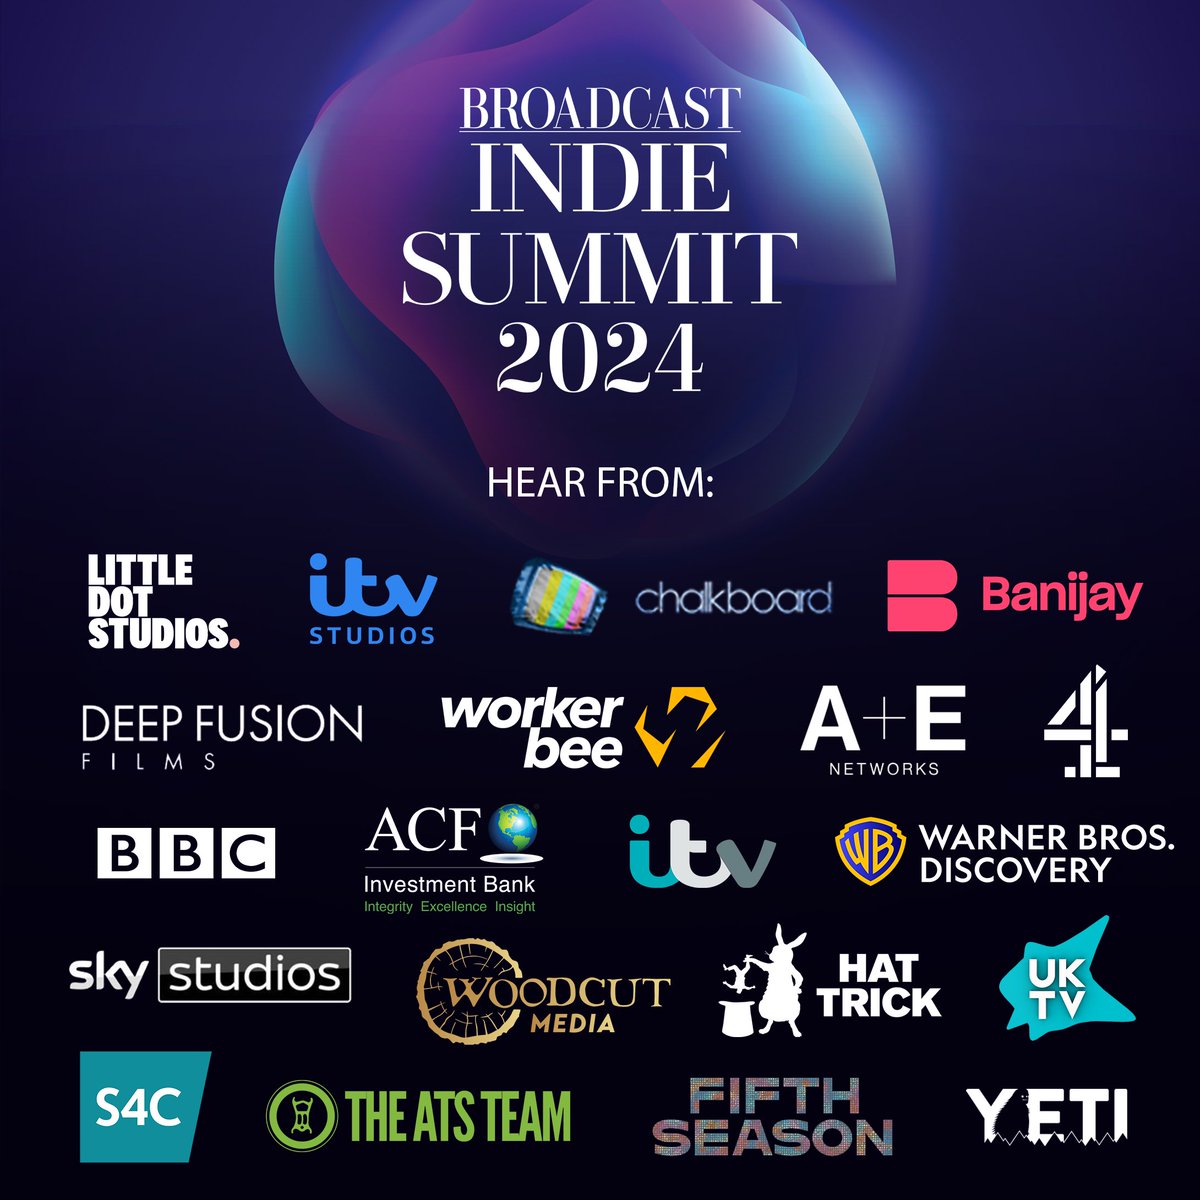 The speaker line-up just keeps growing for next week's #IndieSummit24! From 'How to Work with #Distribtuors' & 'Demystifying #AI' to #SpecialistFactual, 'Pitch Perfect' & 'In Conversation with #BBC's Charlotte Moore' - it's not to be missed! Book now: bit.ly/IndieSummit24